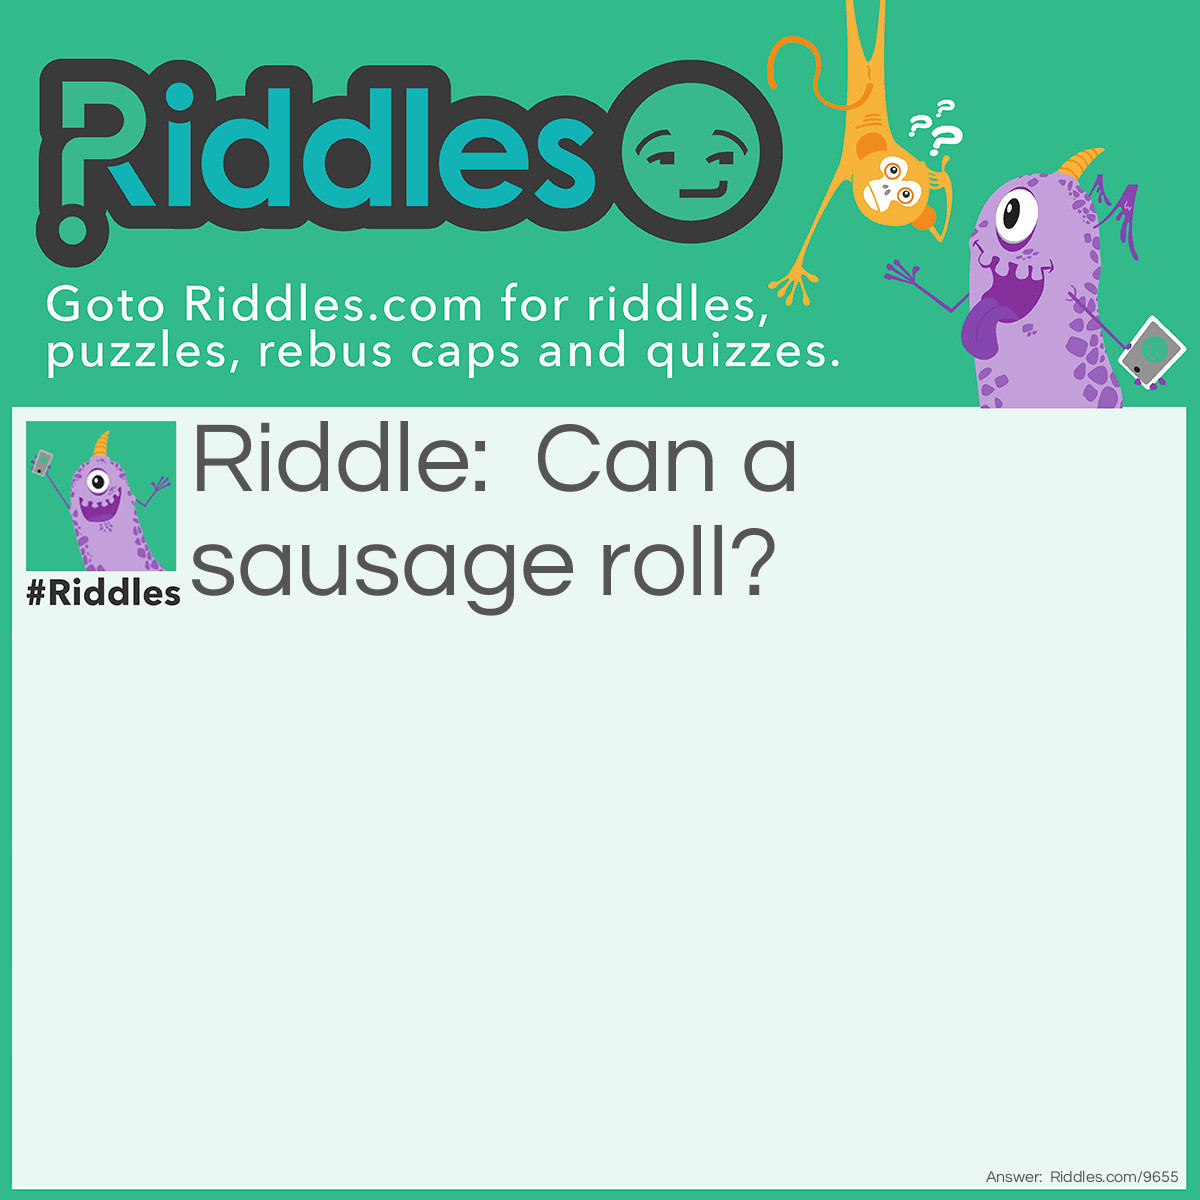 Riddle: Can a sausage roll? Answer: No, but a vege might (mite)